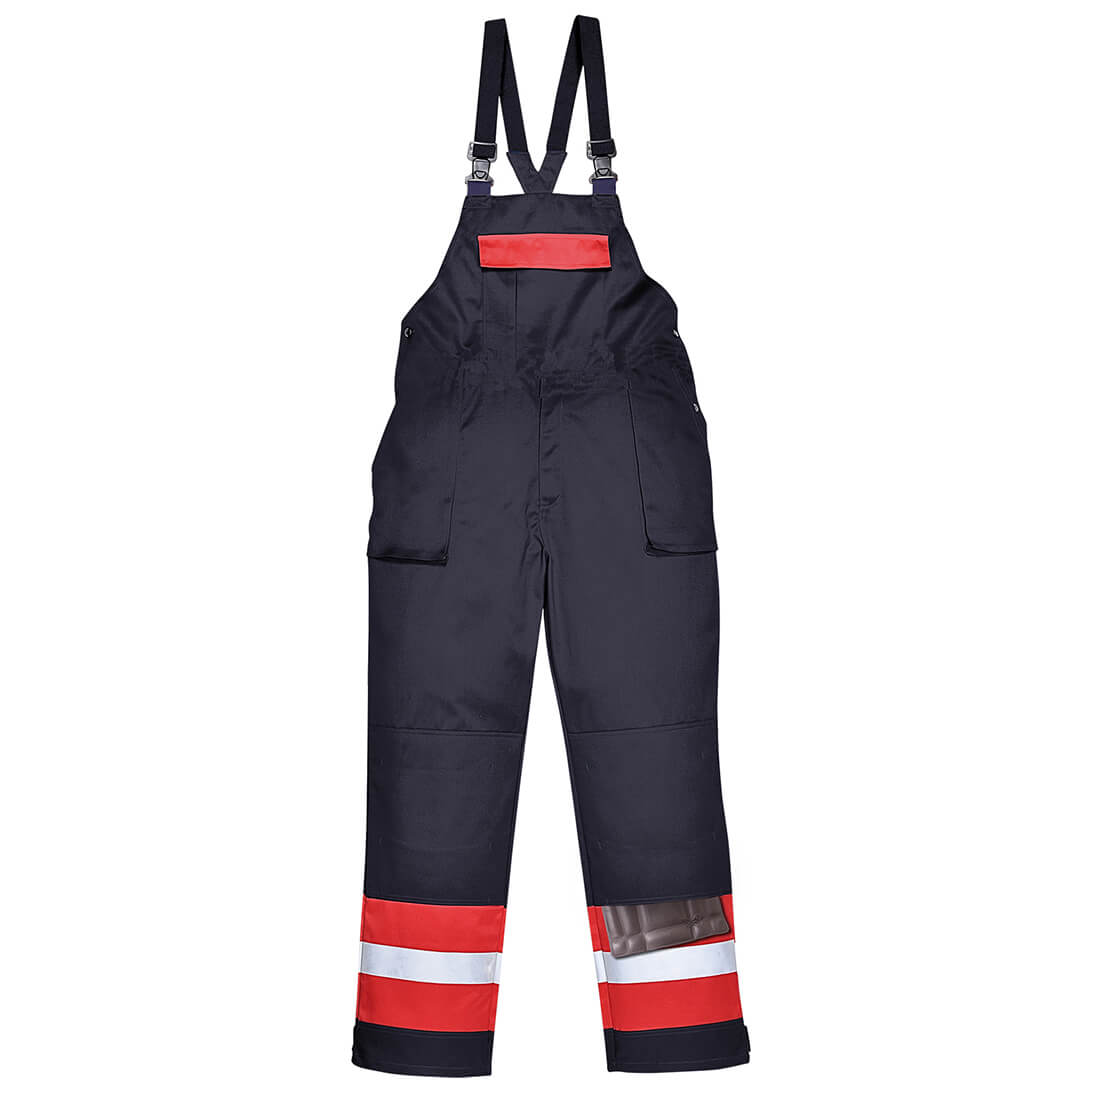 Image of Biz Flame Mens Flame Resistant Plus Bib and Brace Navy S